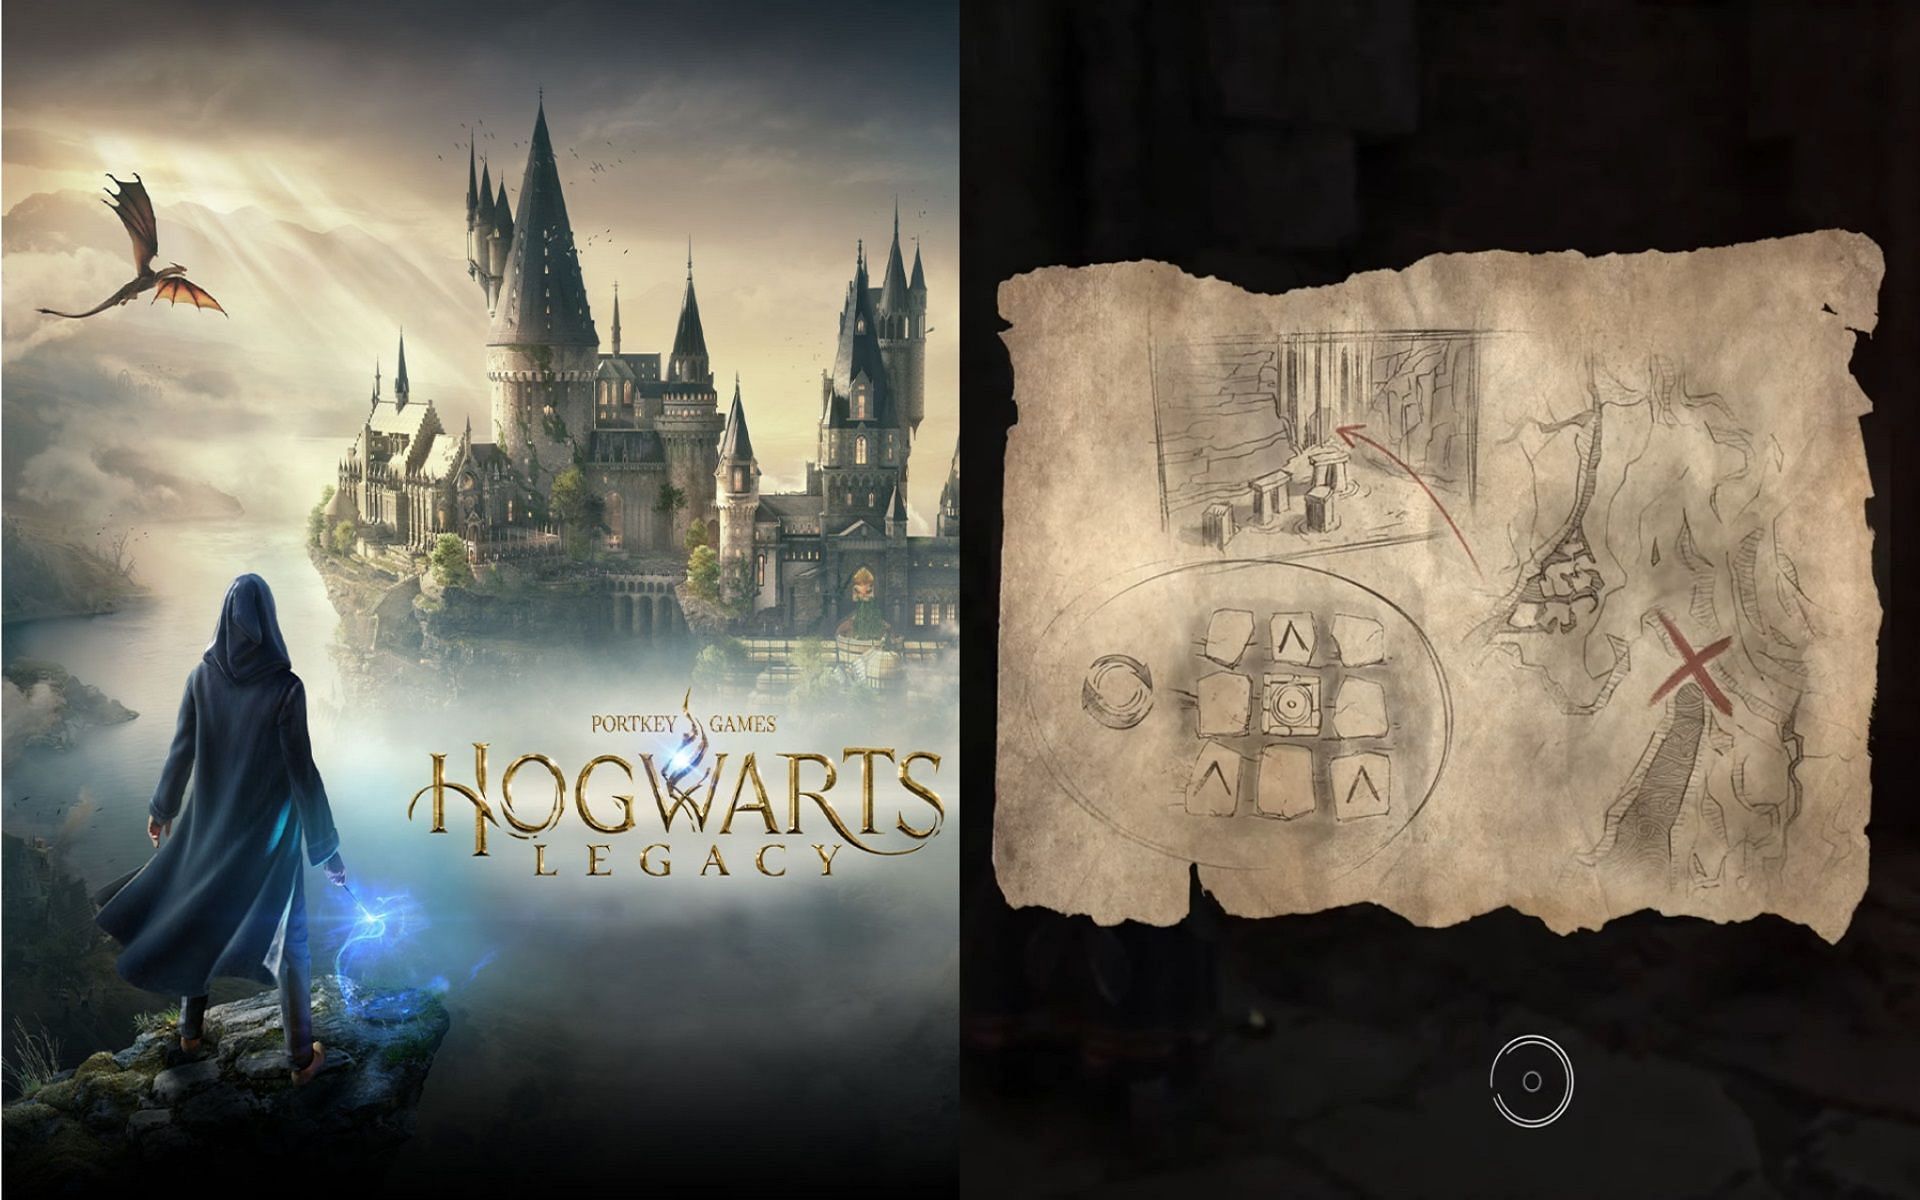 How to get into the witch's tomb hogwarts legacy